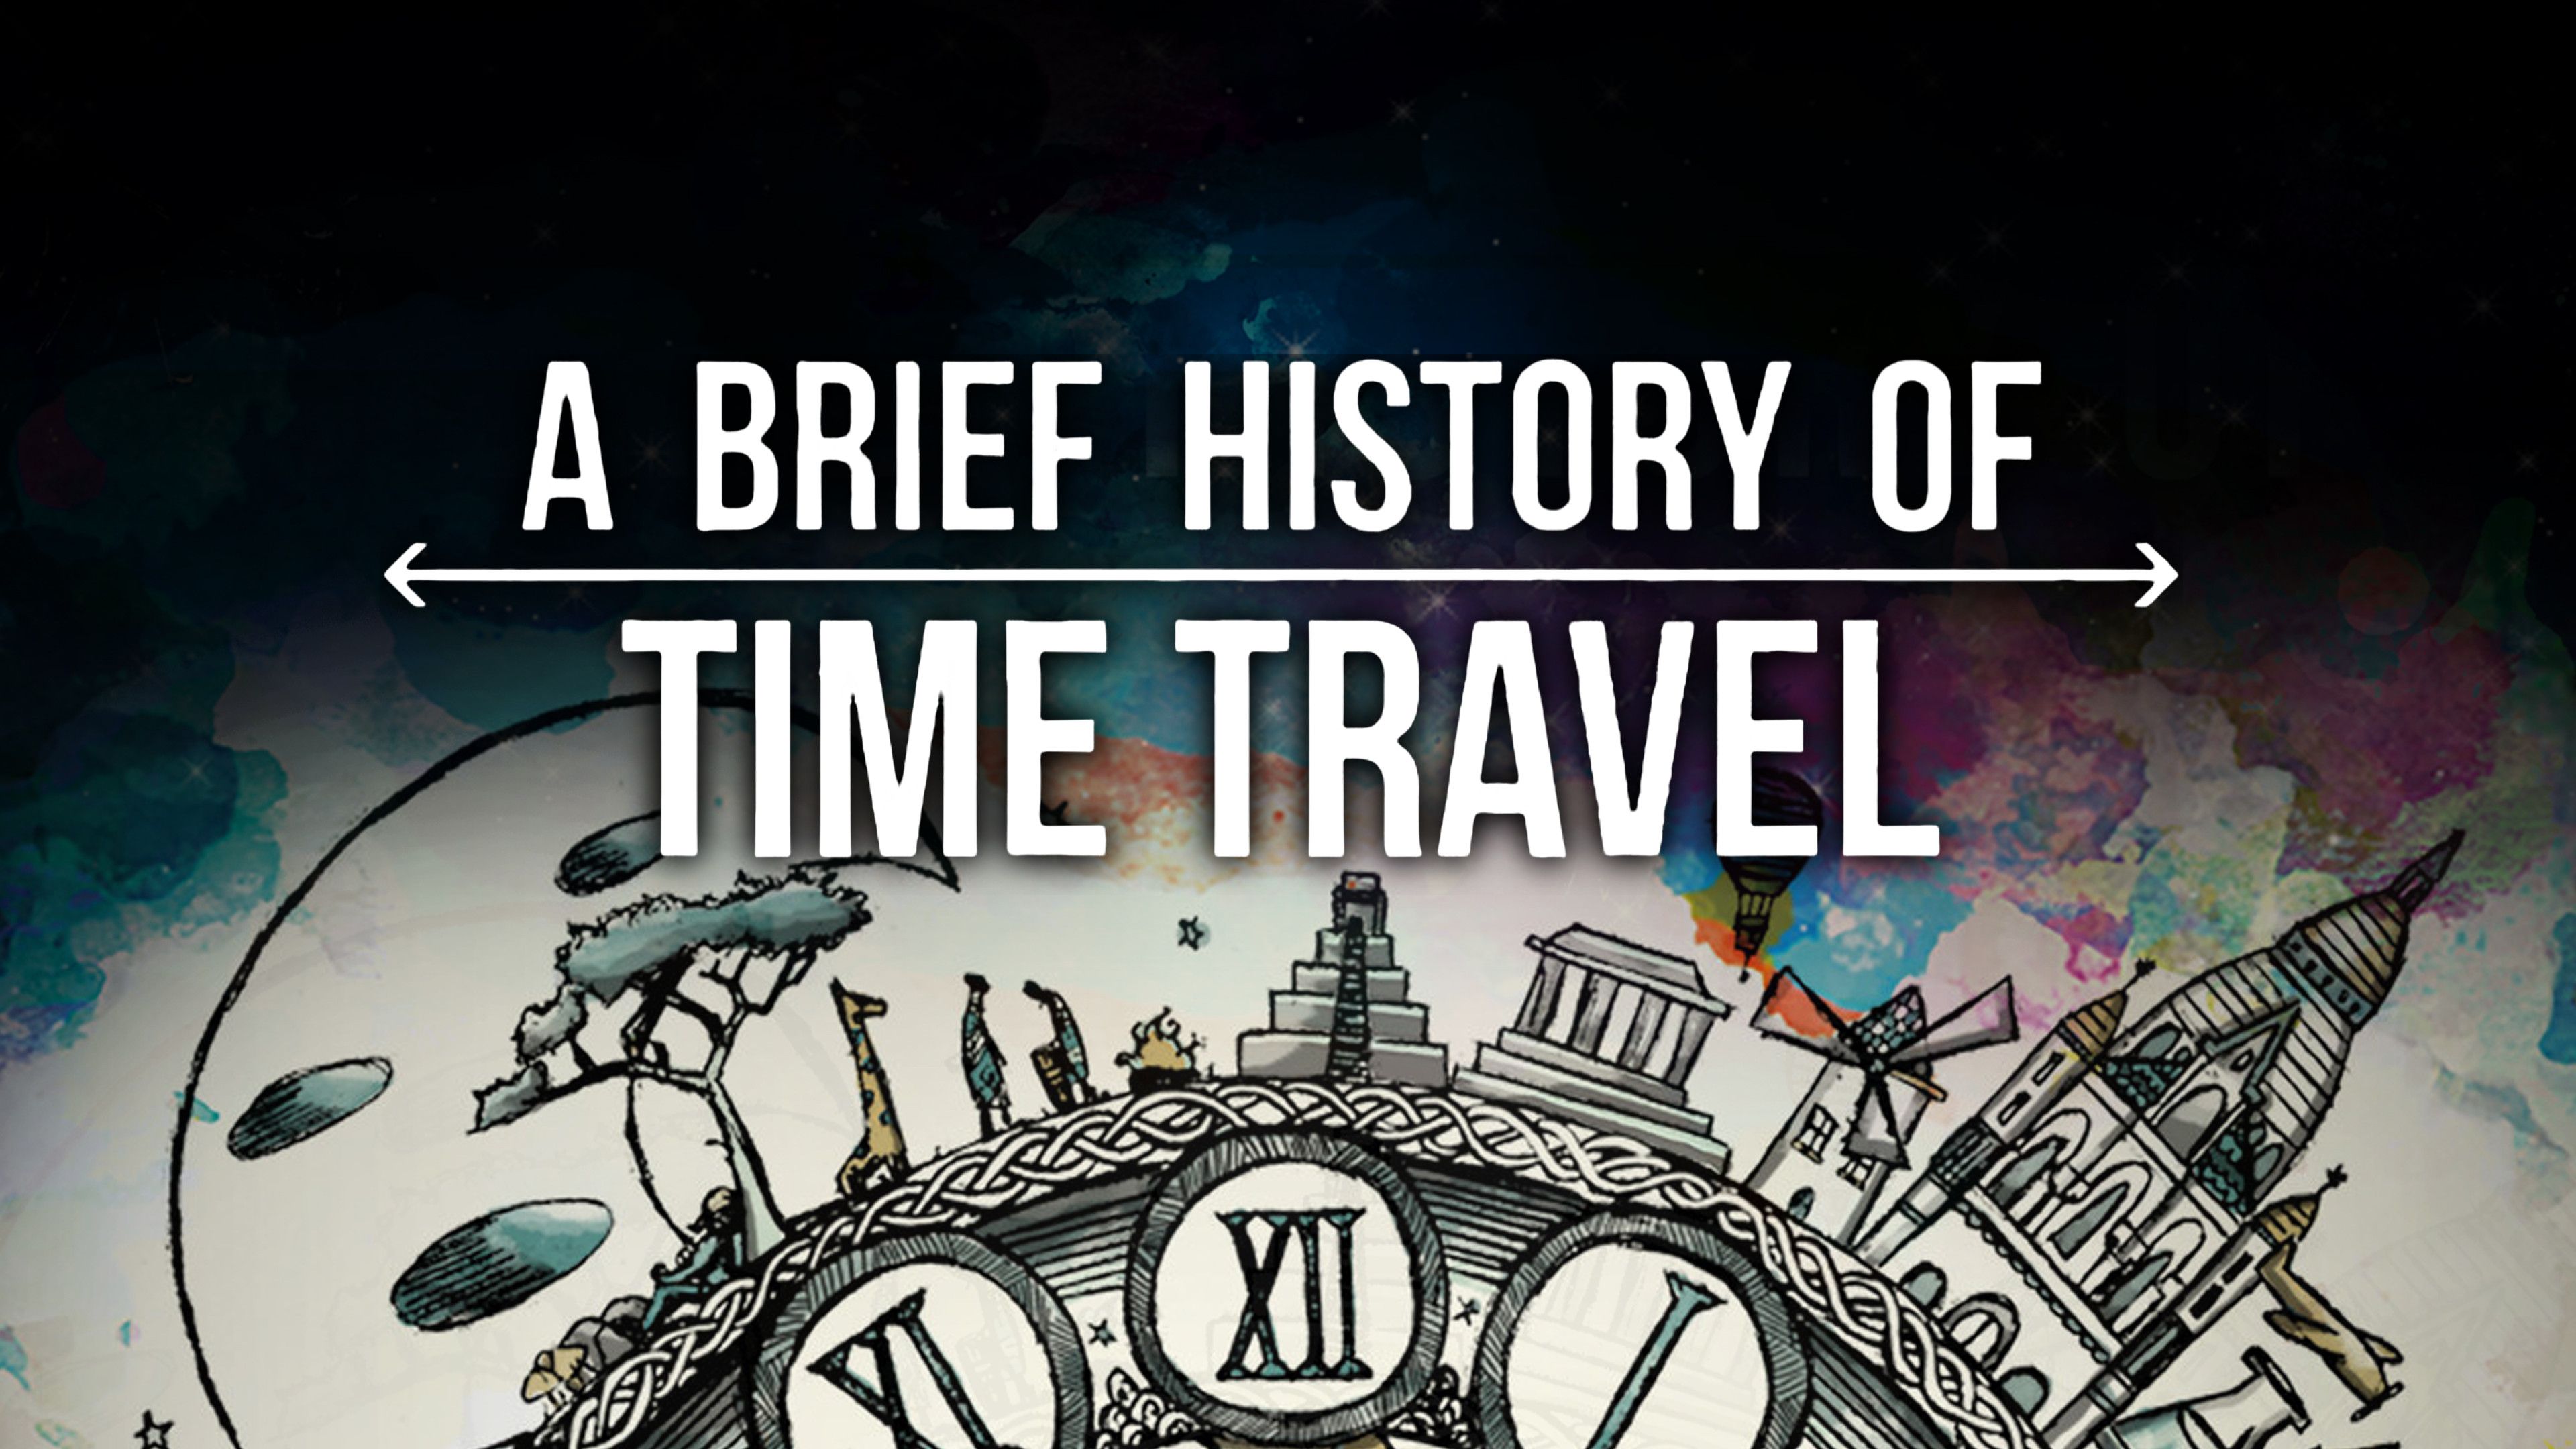 the history of time travel